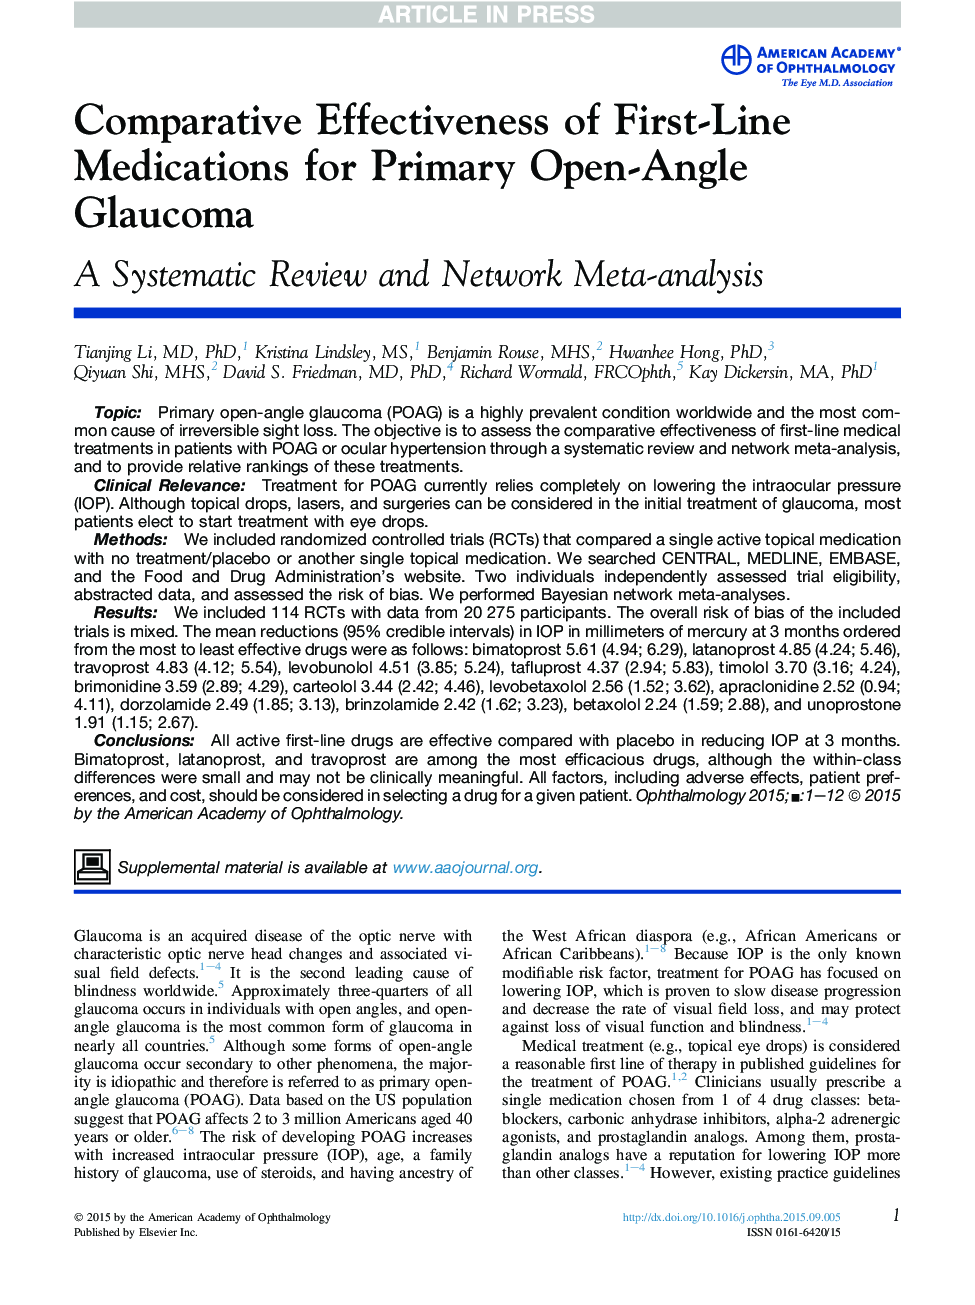 Comparative Effectiveness of First-Line Medications for Primary Open-Angle Glaucoma